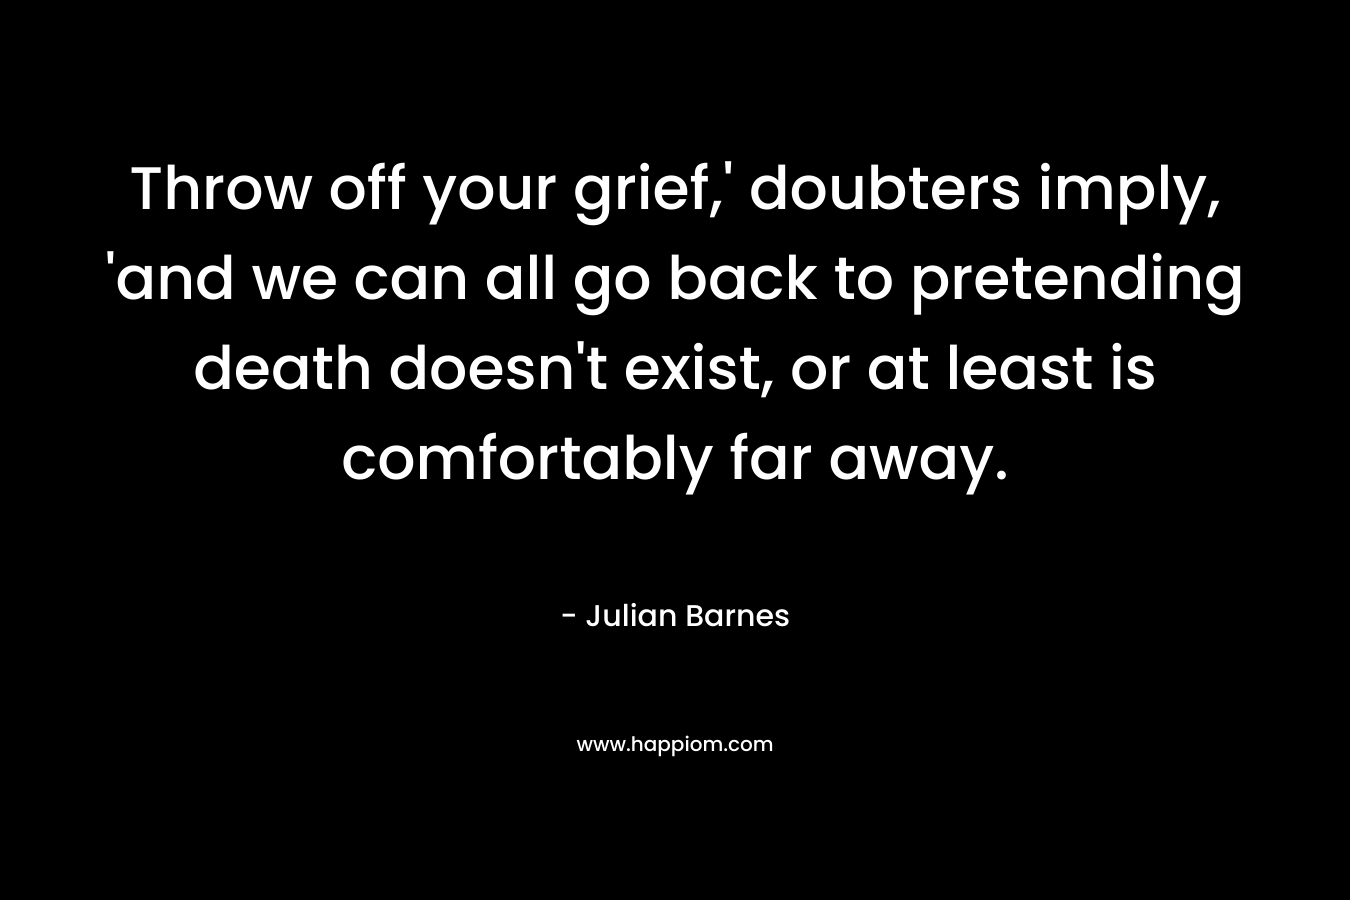 Throw off your grief,' doubters imply, 'and we can all go back to pretending death doesn't exist, or at least is comfortably far away.